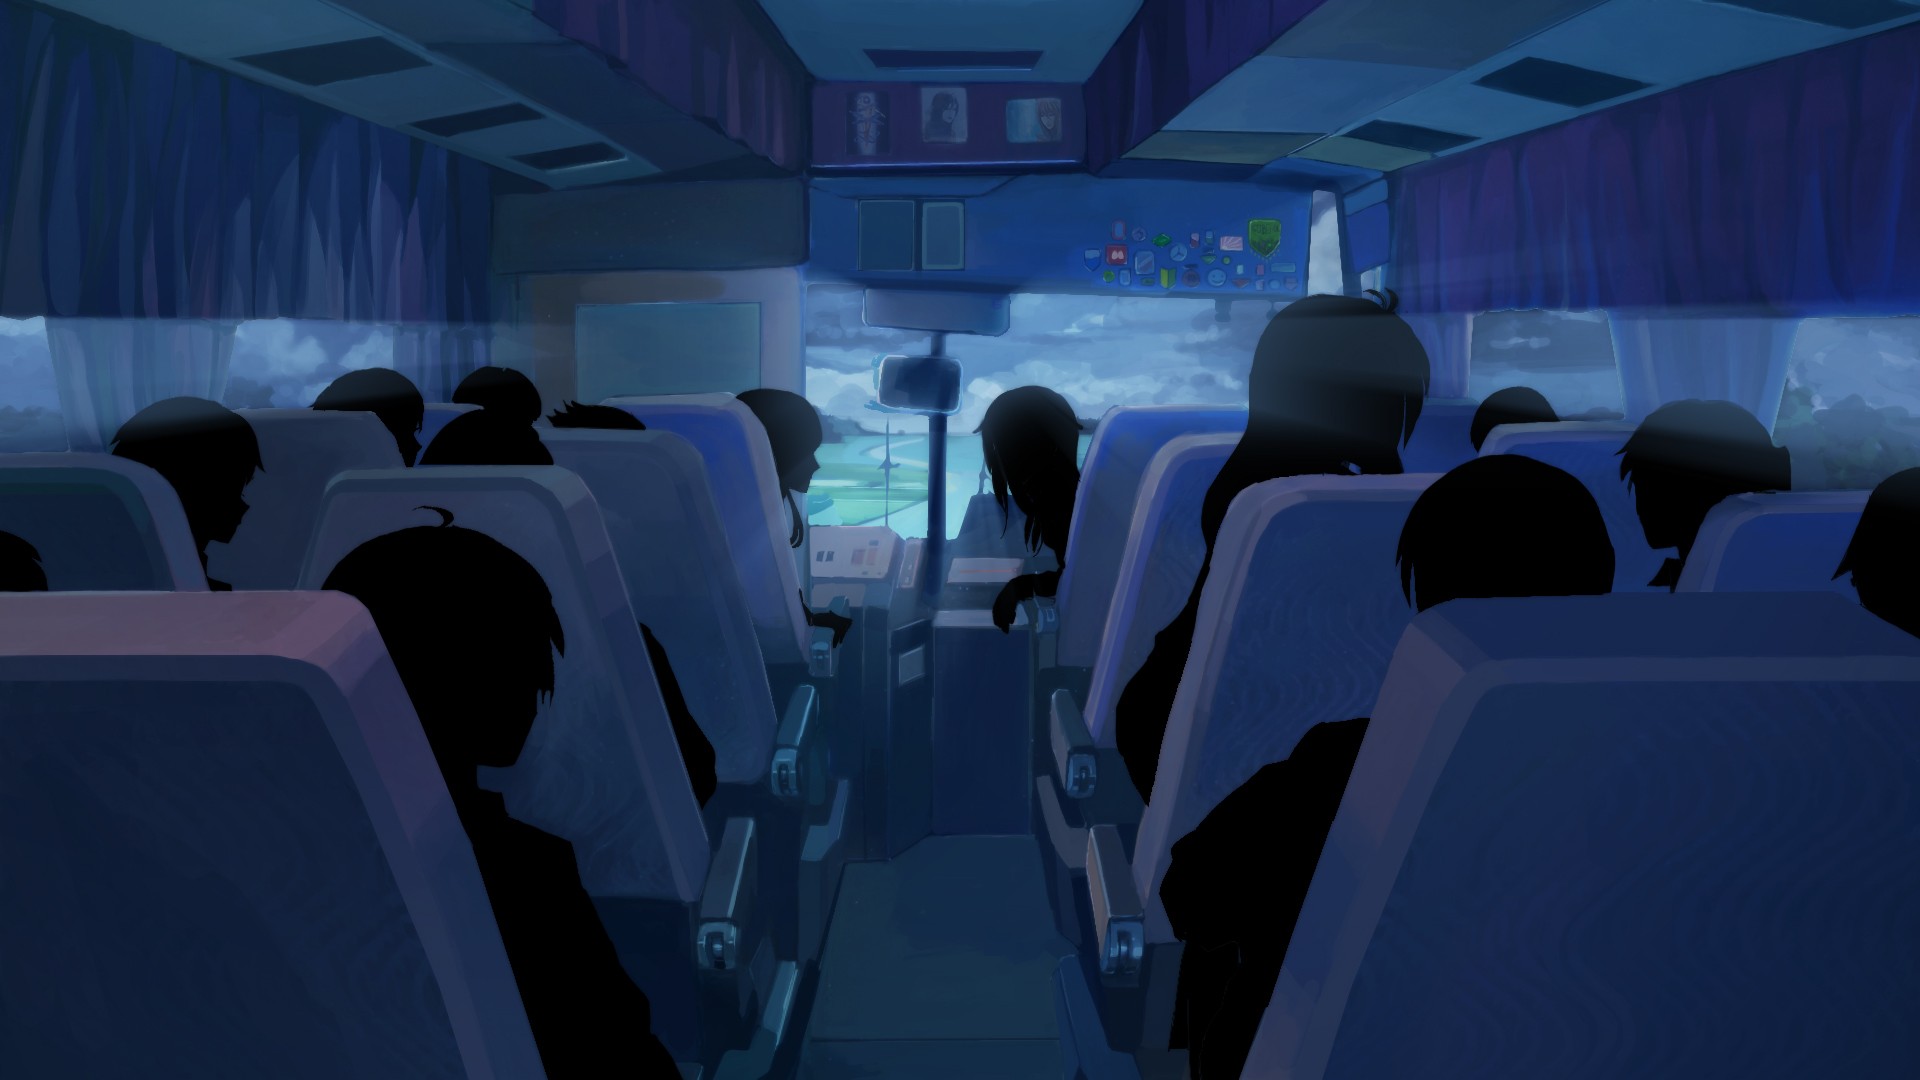 shadow, Buses, Clouds, Everlasting Summer, Anime, People Wallpaper